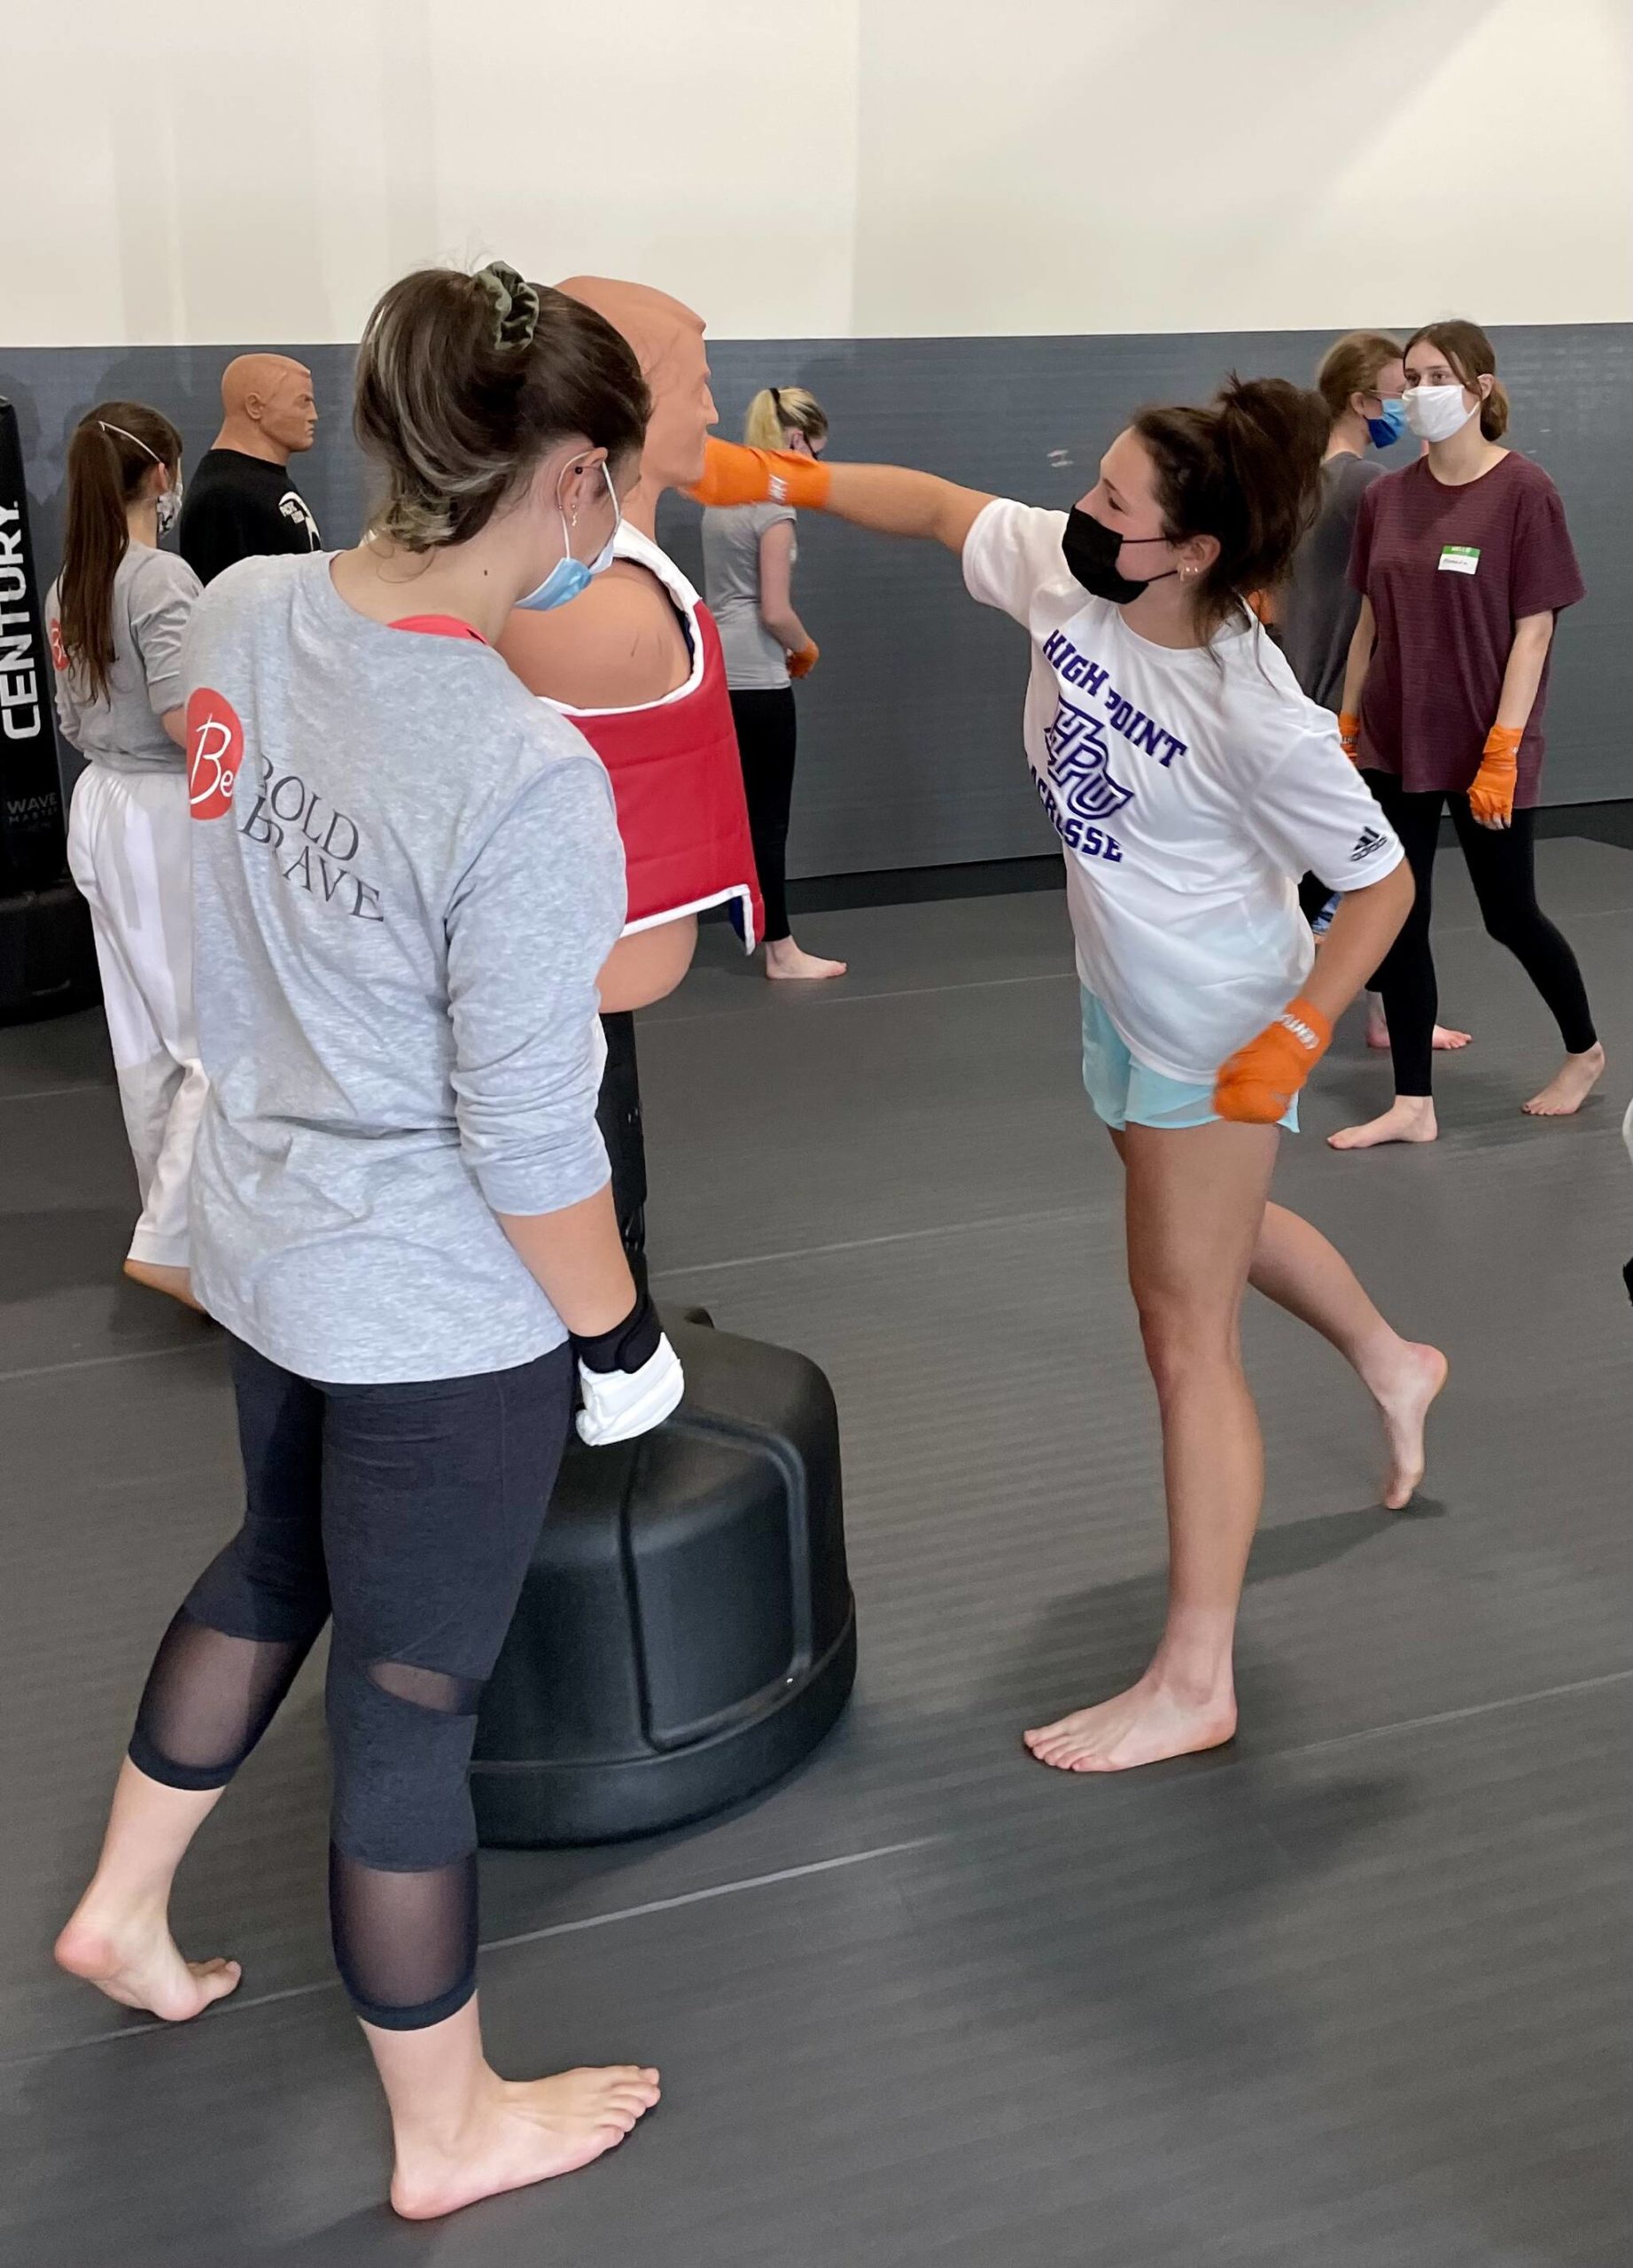 Be Bold Be Brave is a workshop that takes a holistic approach to self-defense and teaching women the mental empowerment to believe they are worth defending. (Contributed photo)